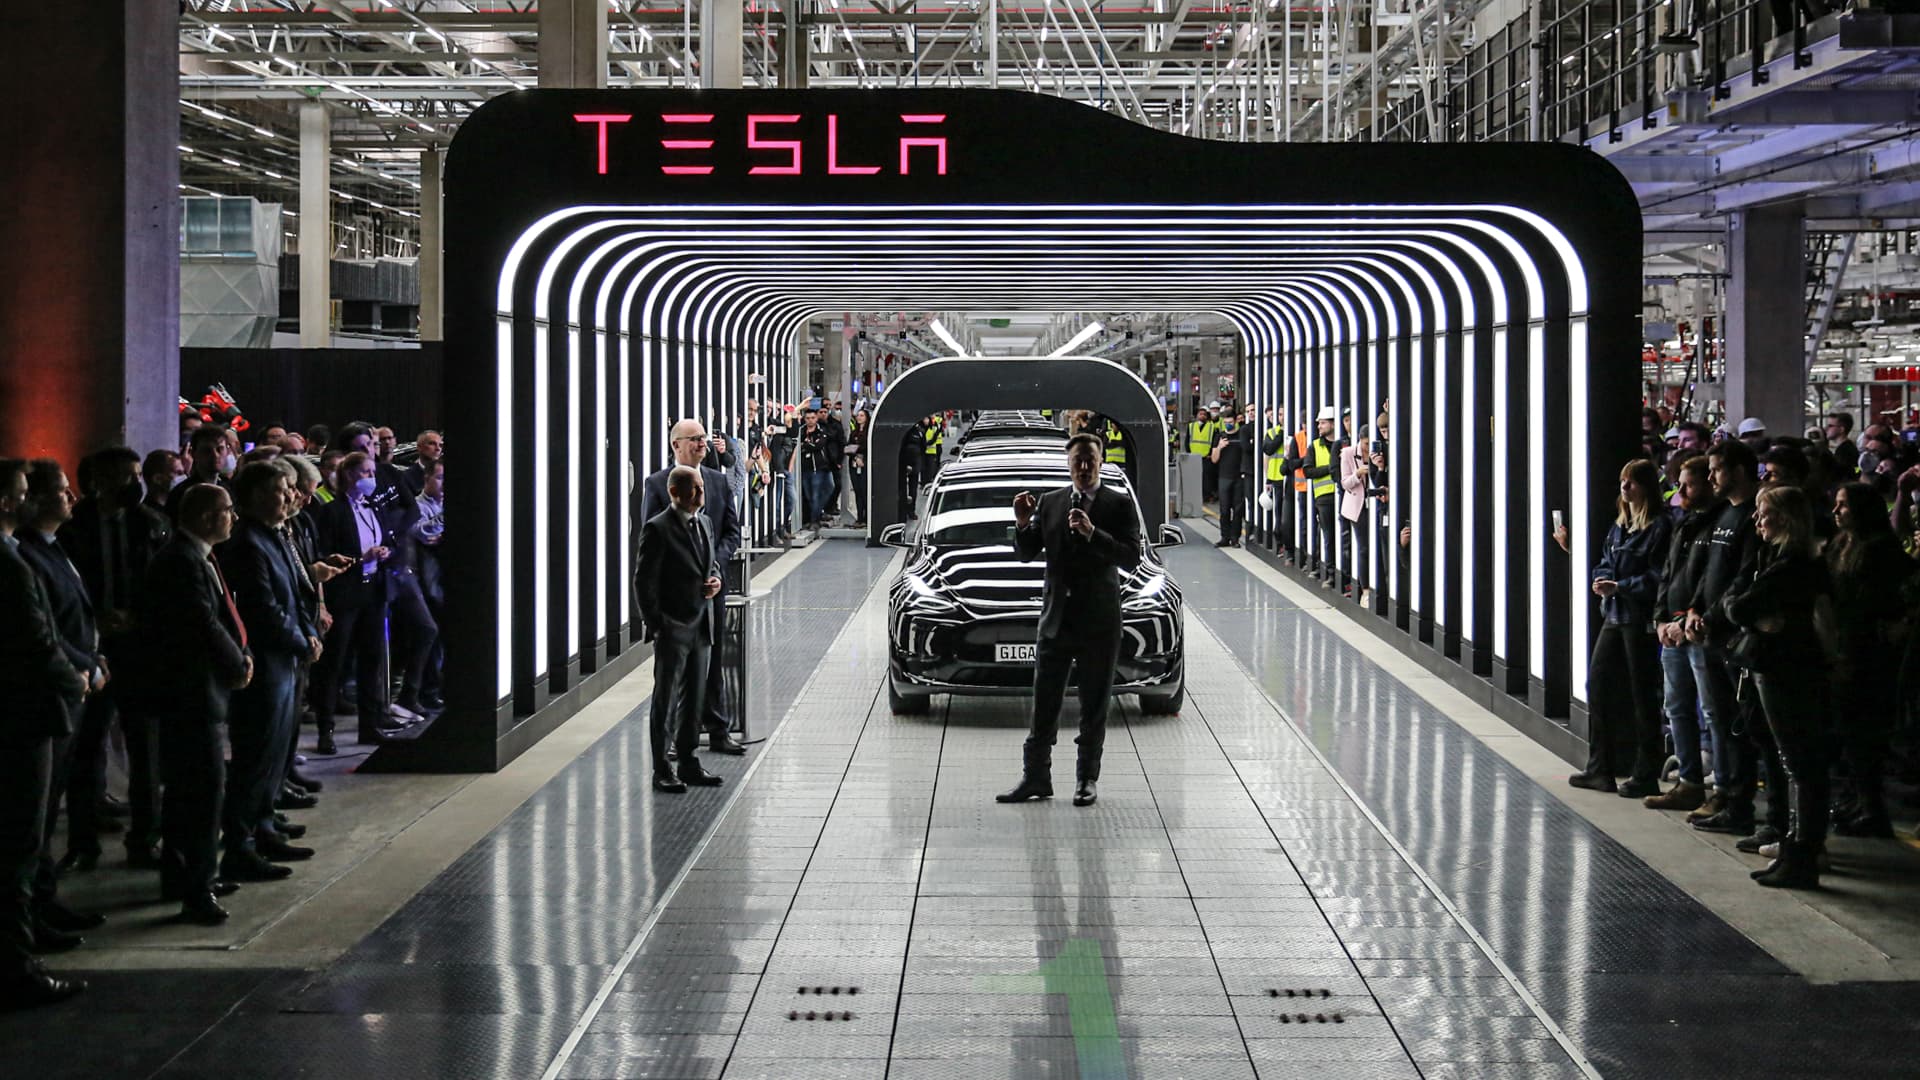 German road traffic agency says 59,000 Tesla vehicles have software glitch